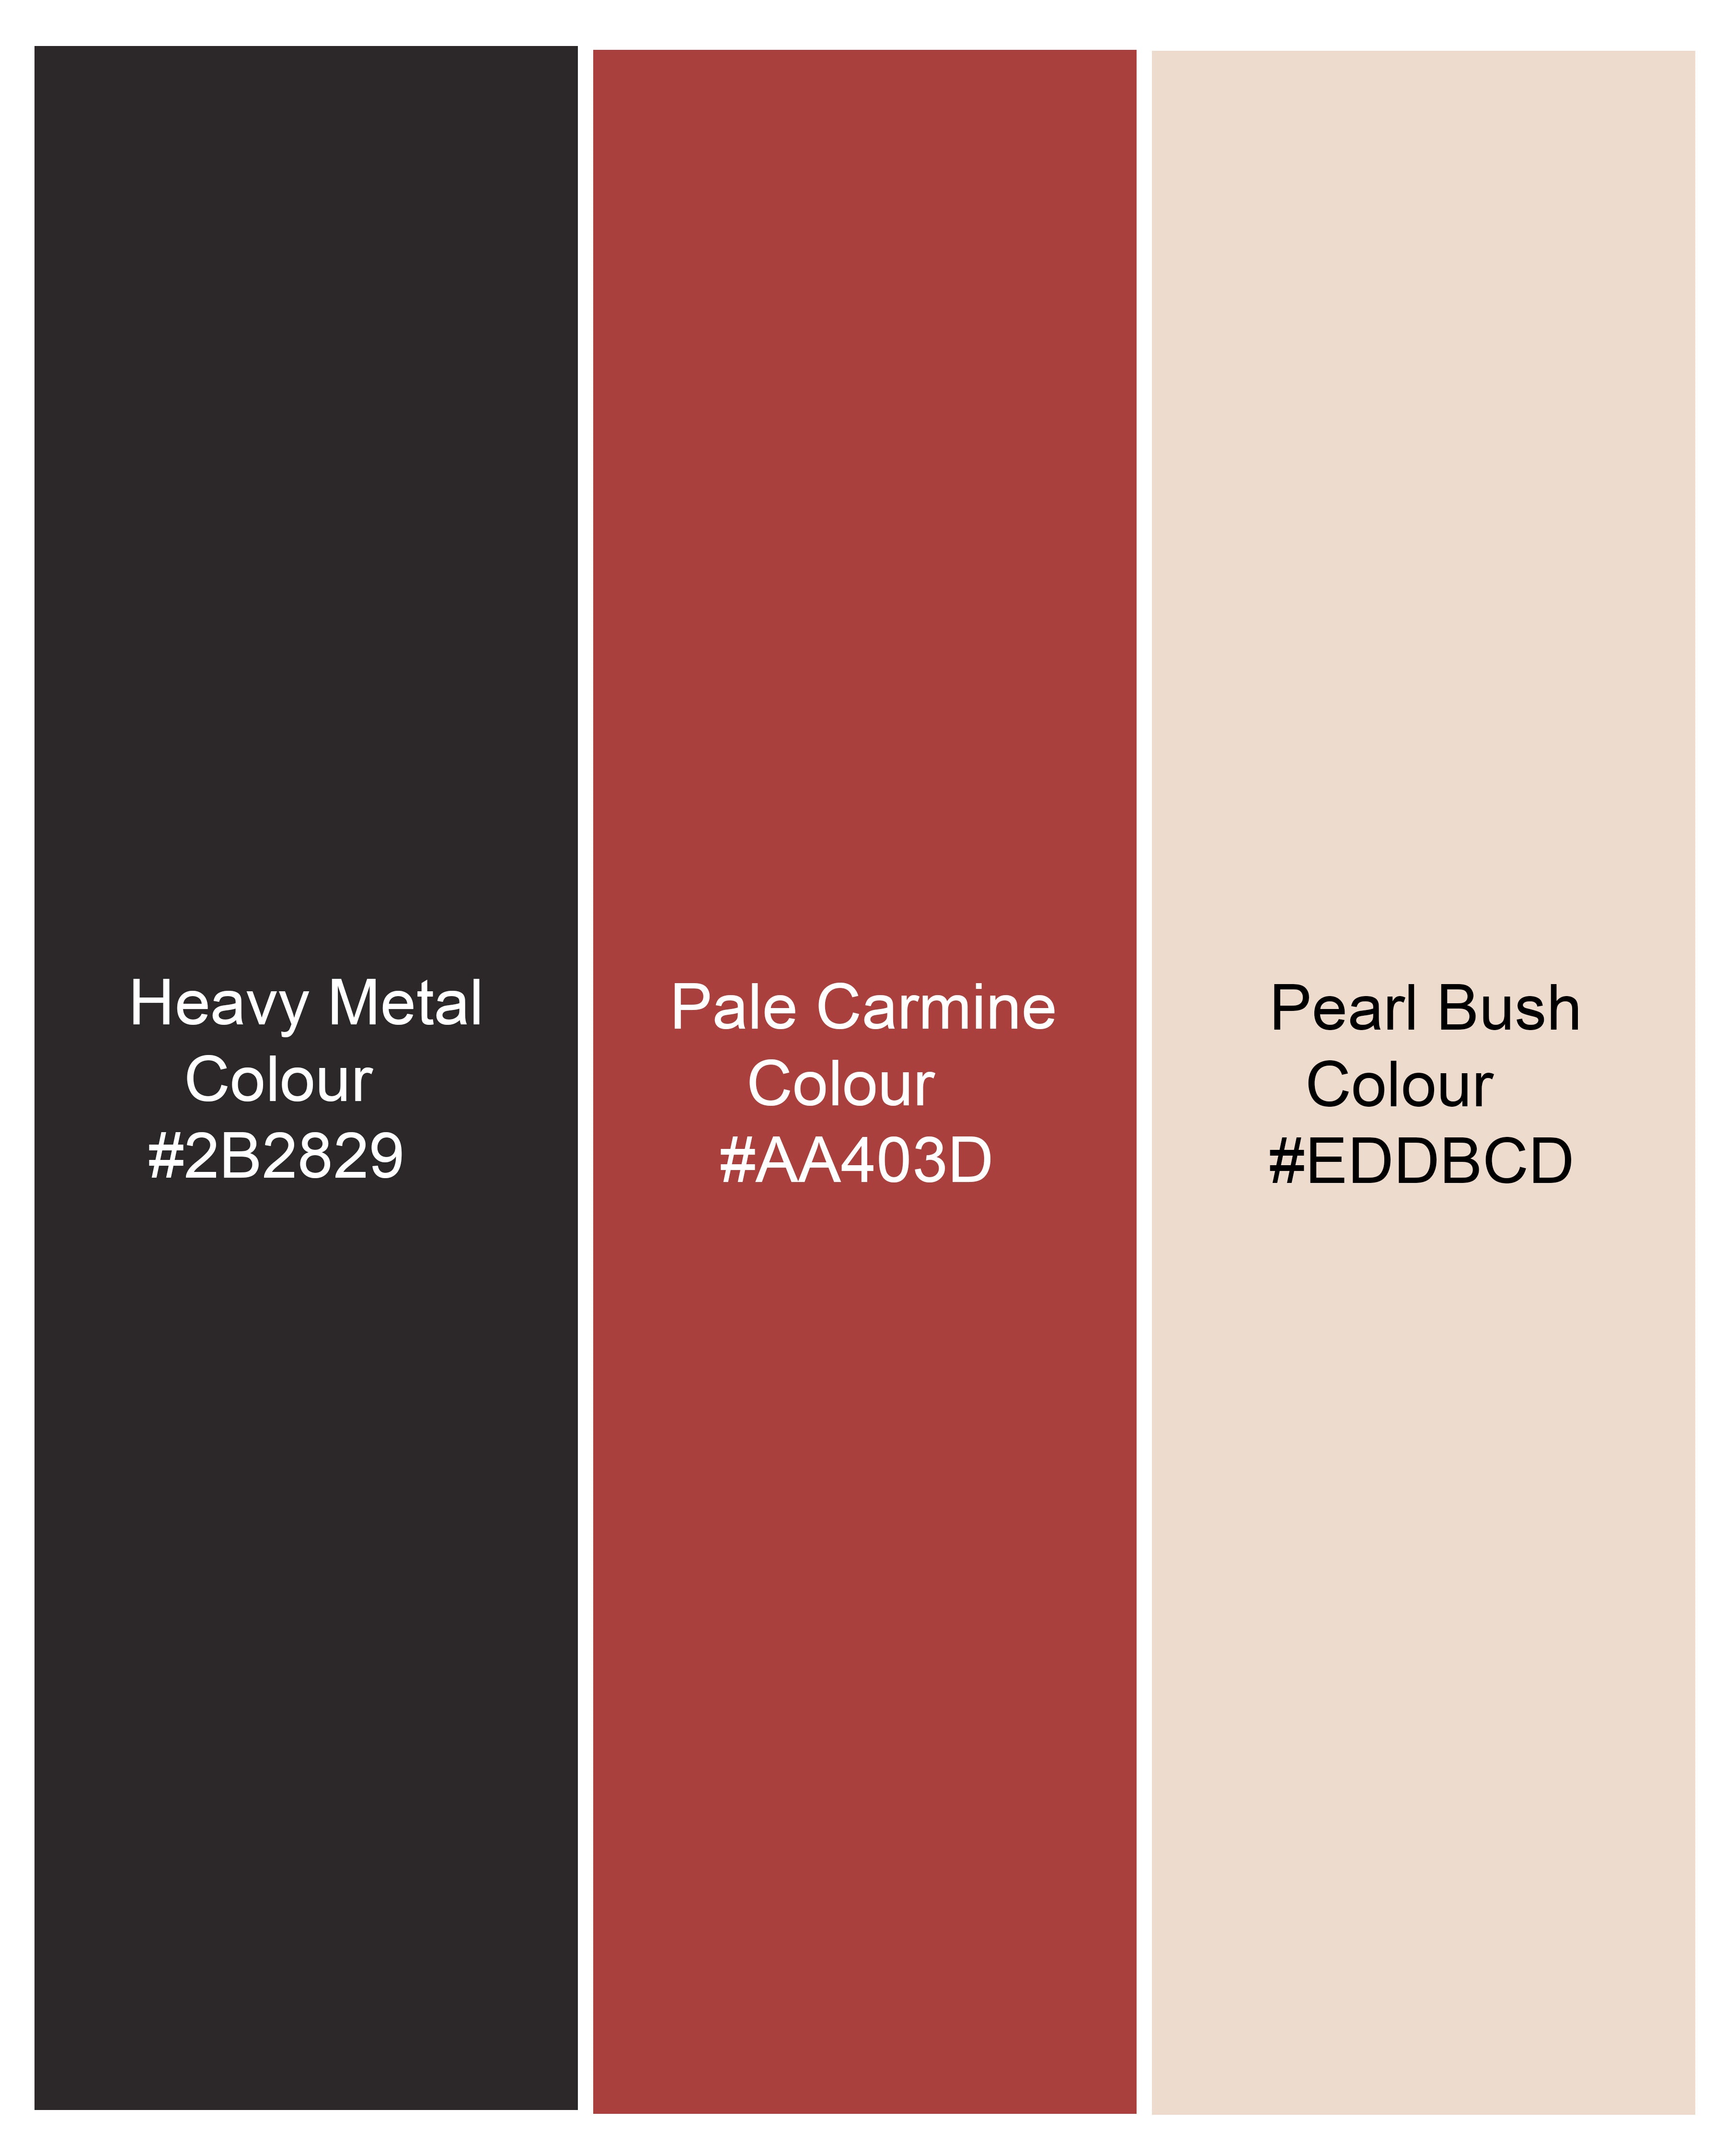 Heavy Metal Brown and Pale Carmine Red Premium Cotton Boxers BX474-28, BX474-30, BX474-32, BX474-34, BX474-36, BX474-38, BX474-40, BX474-42, BX474-44